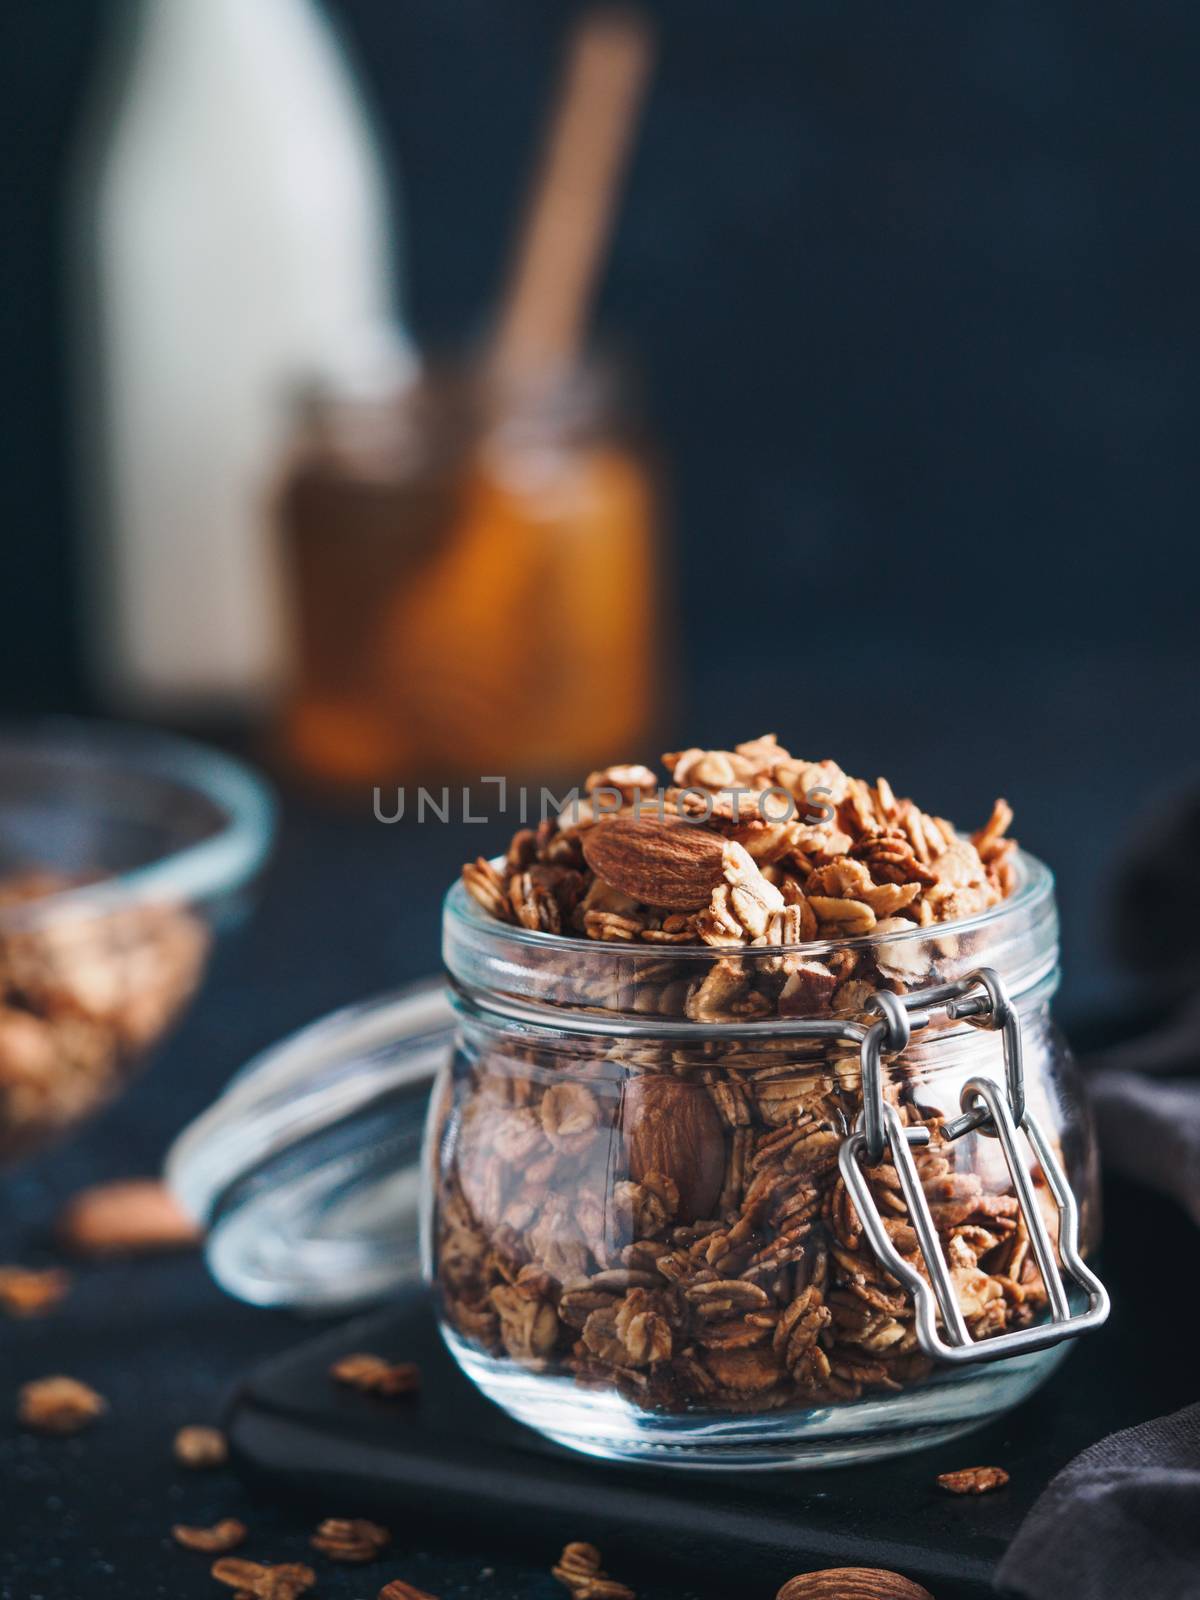 Homemade granola in glass jar on dark table. Ingredients for healthy breakfast - granola, milk and honey. Copy space for text. Low key.